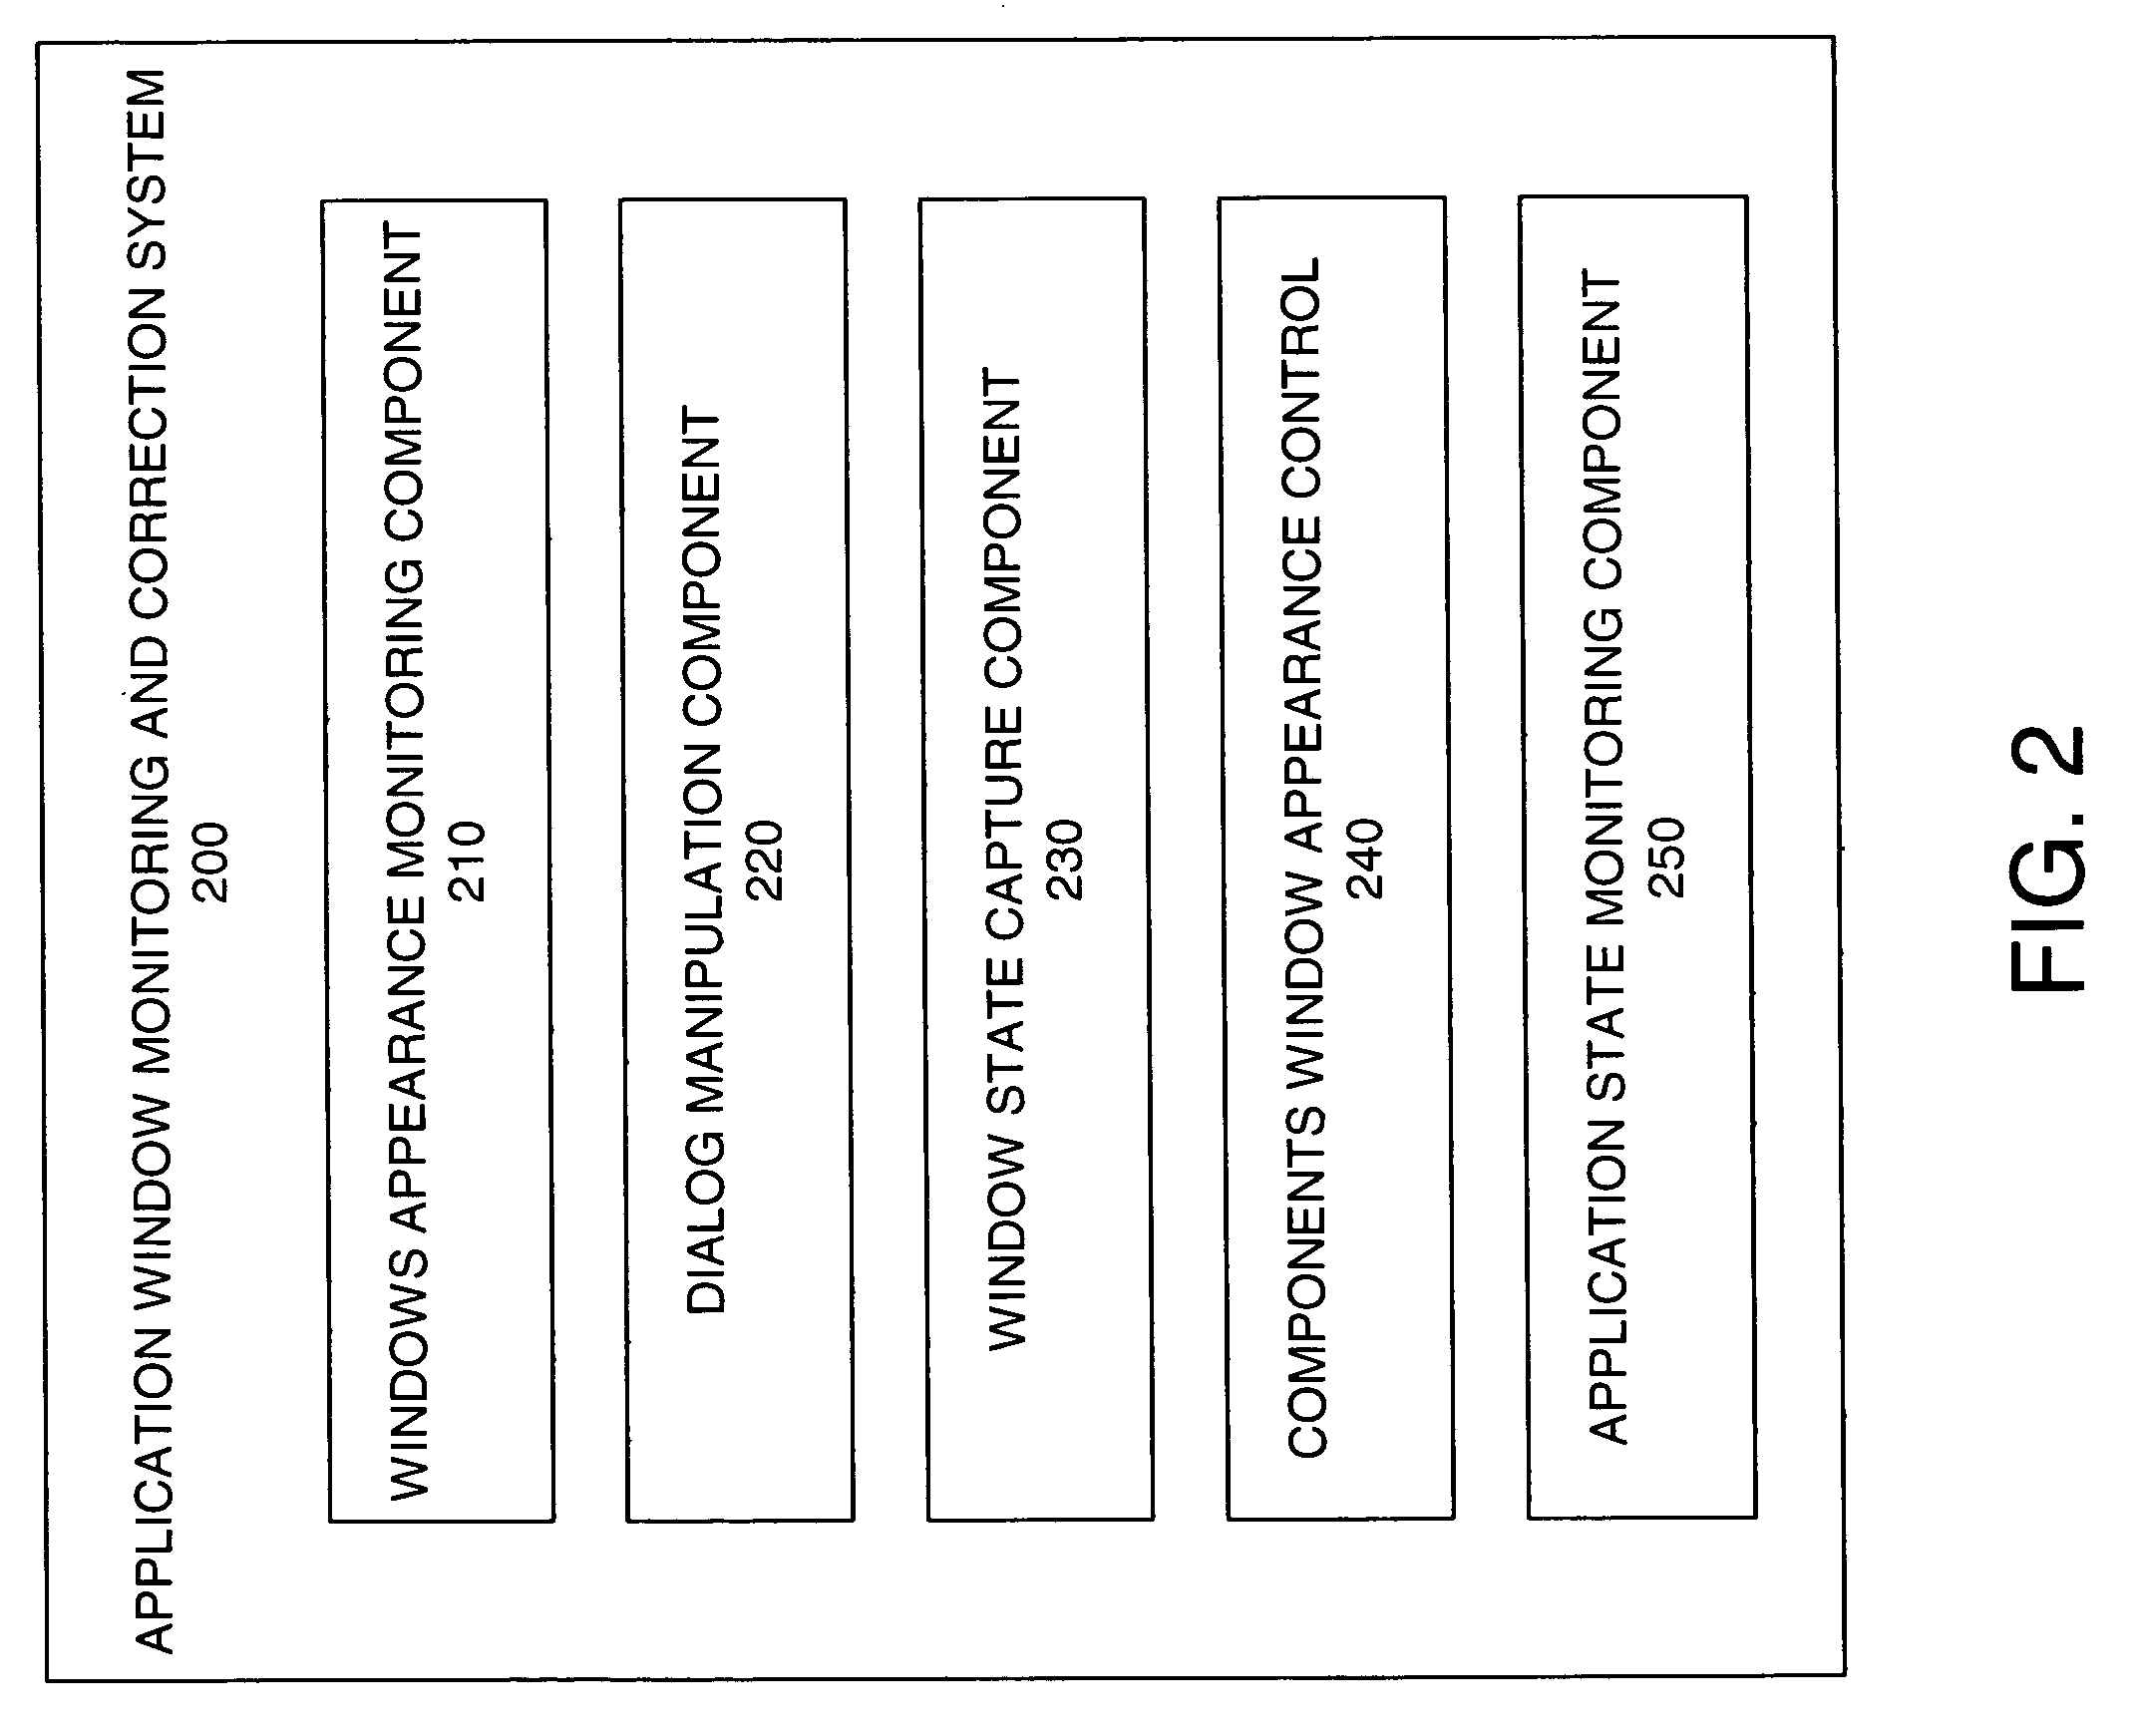 System and method for monitoring application response and providing visual treatment